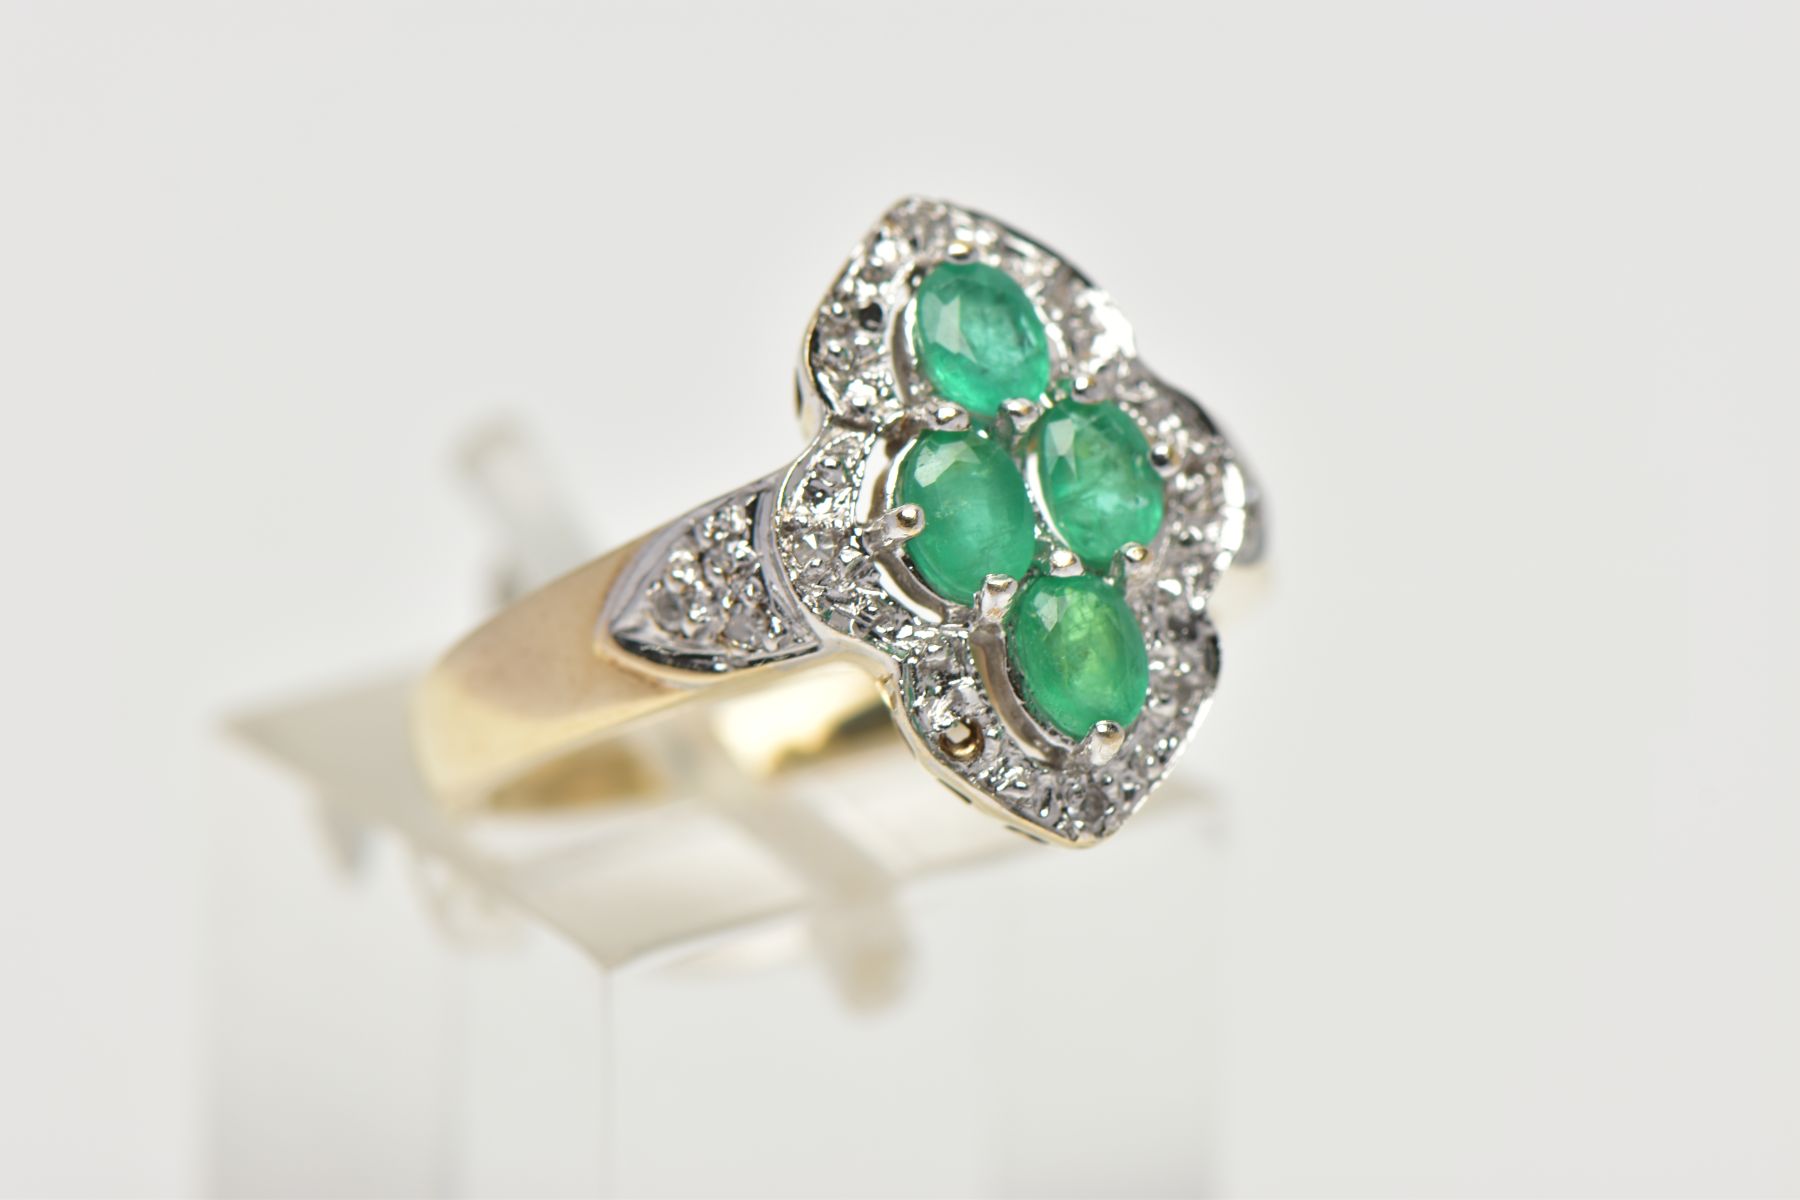 A 9CT YELLOW AND WHITE GOLD EMERALD AND DIAMOND DRESS RING, set with four oval cut emeralds, - Image 4 of 4